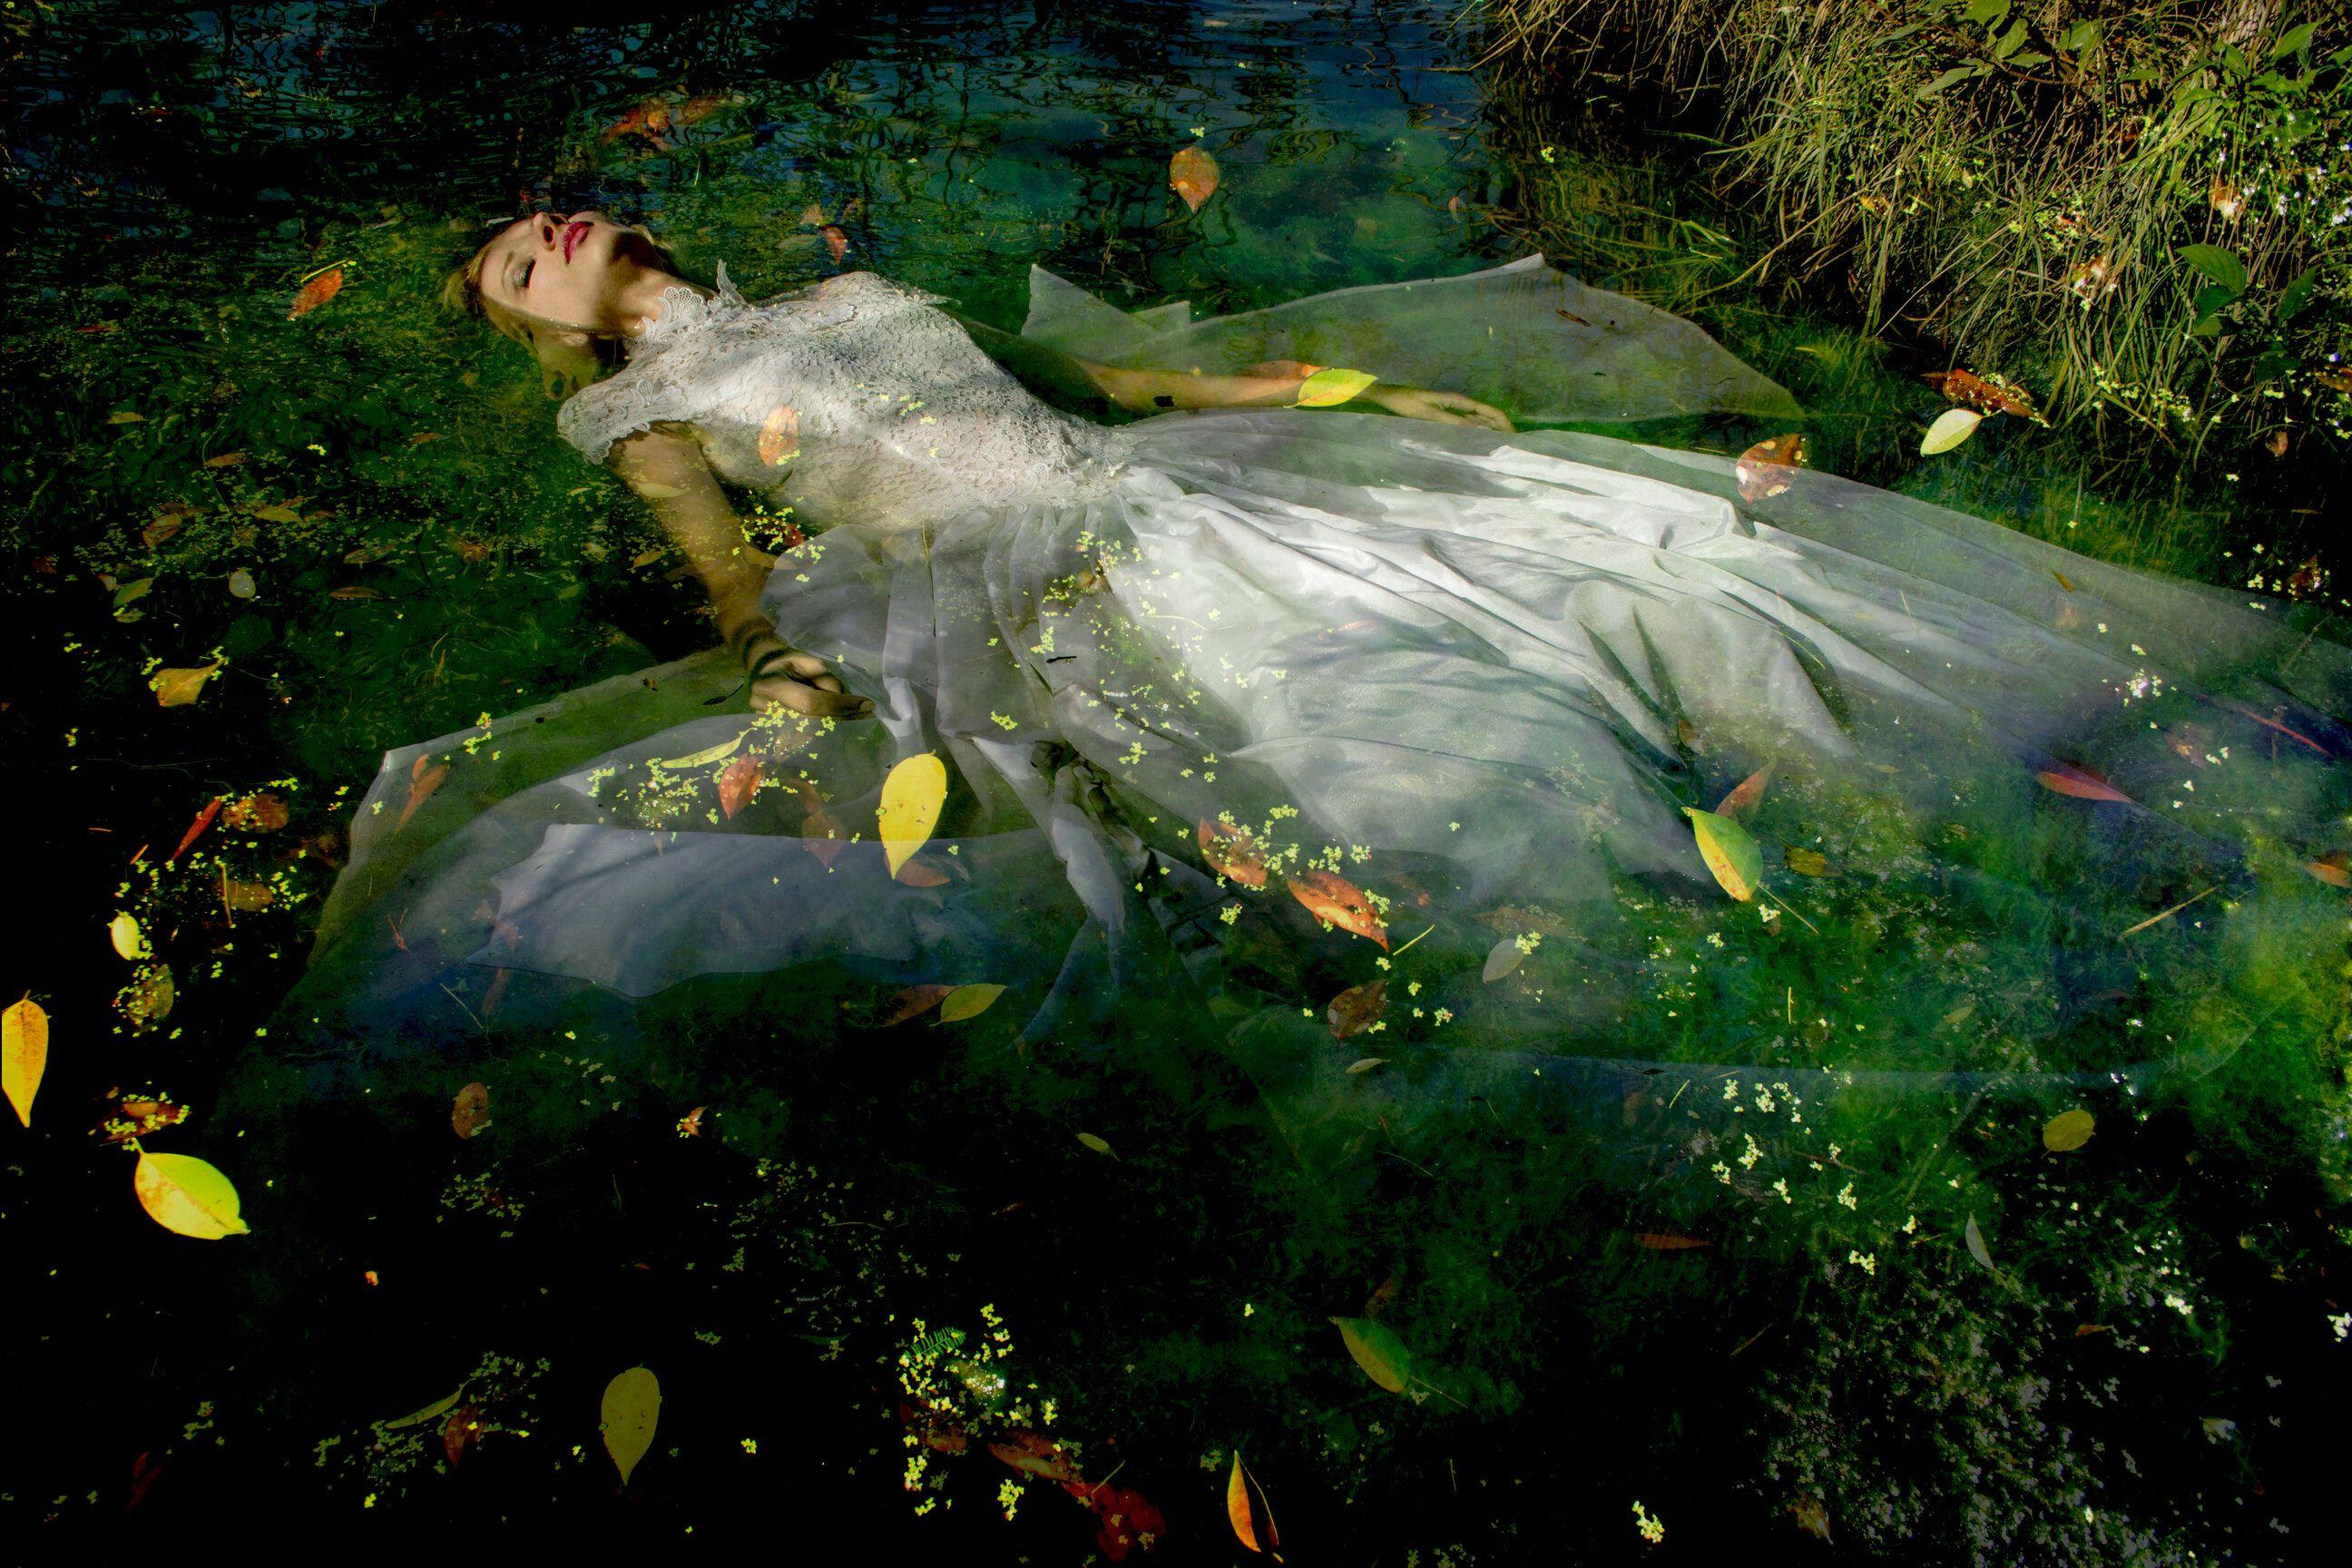 Viet Ha Tran Color Photograph - Take me to your dreams Ophelia III, Photograph, C-Type